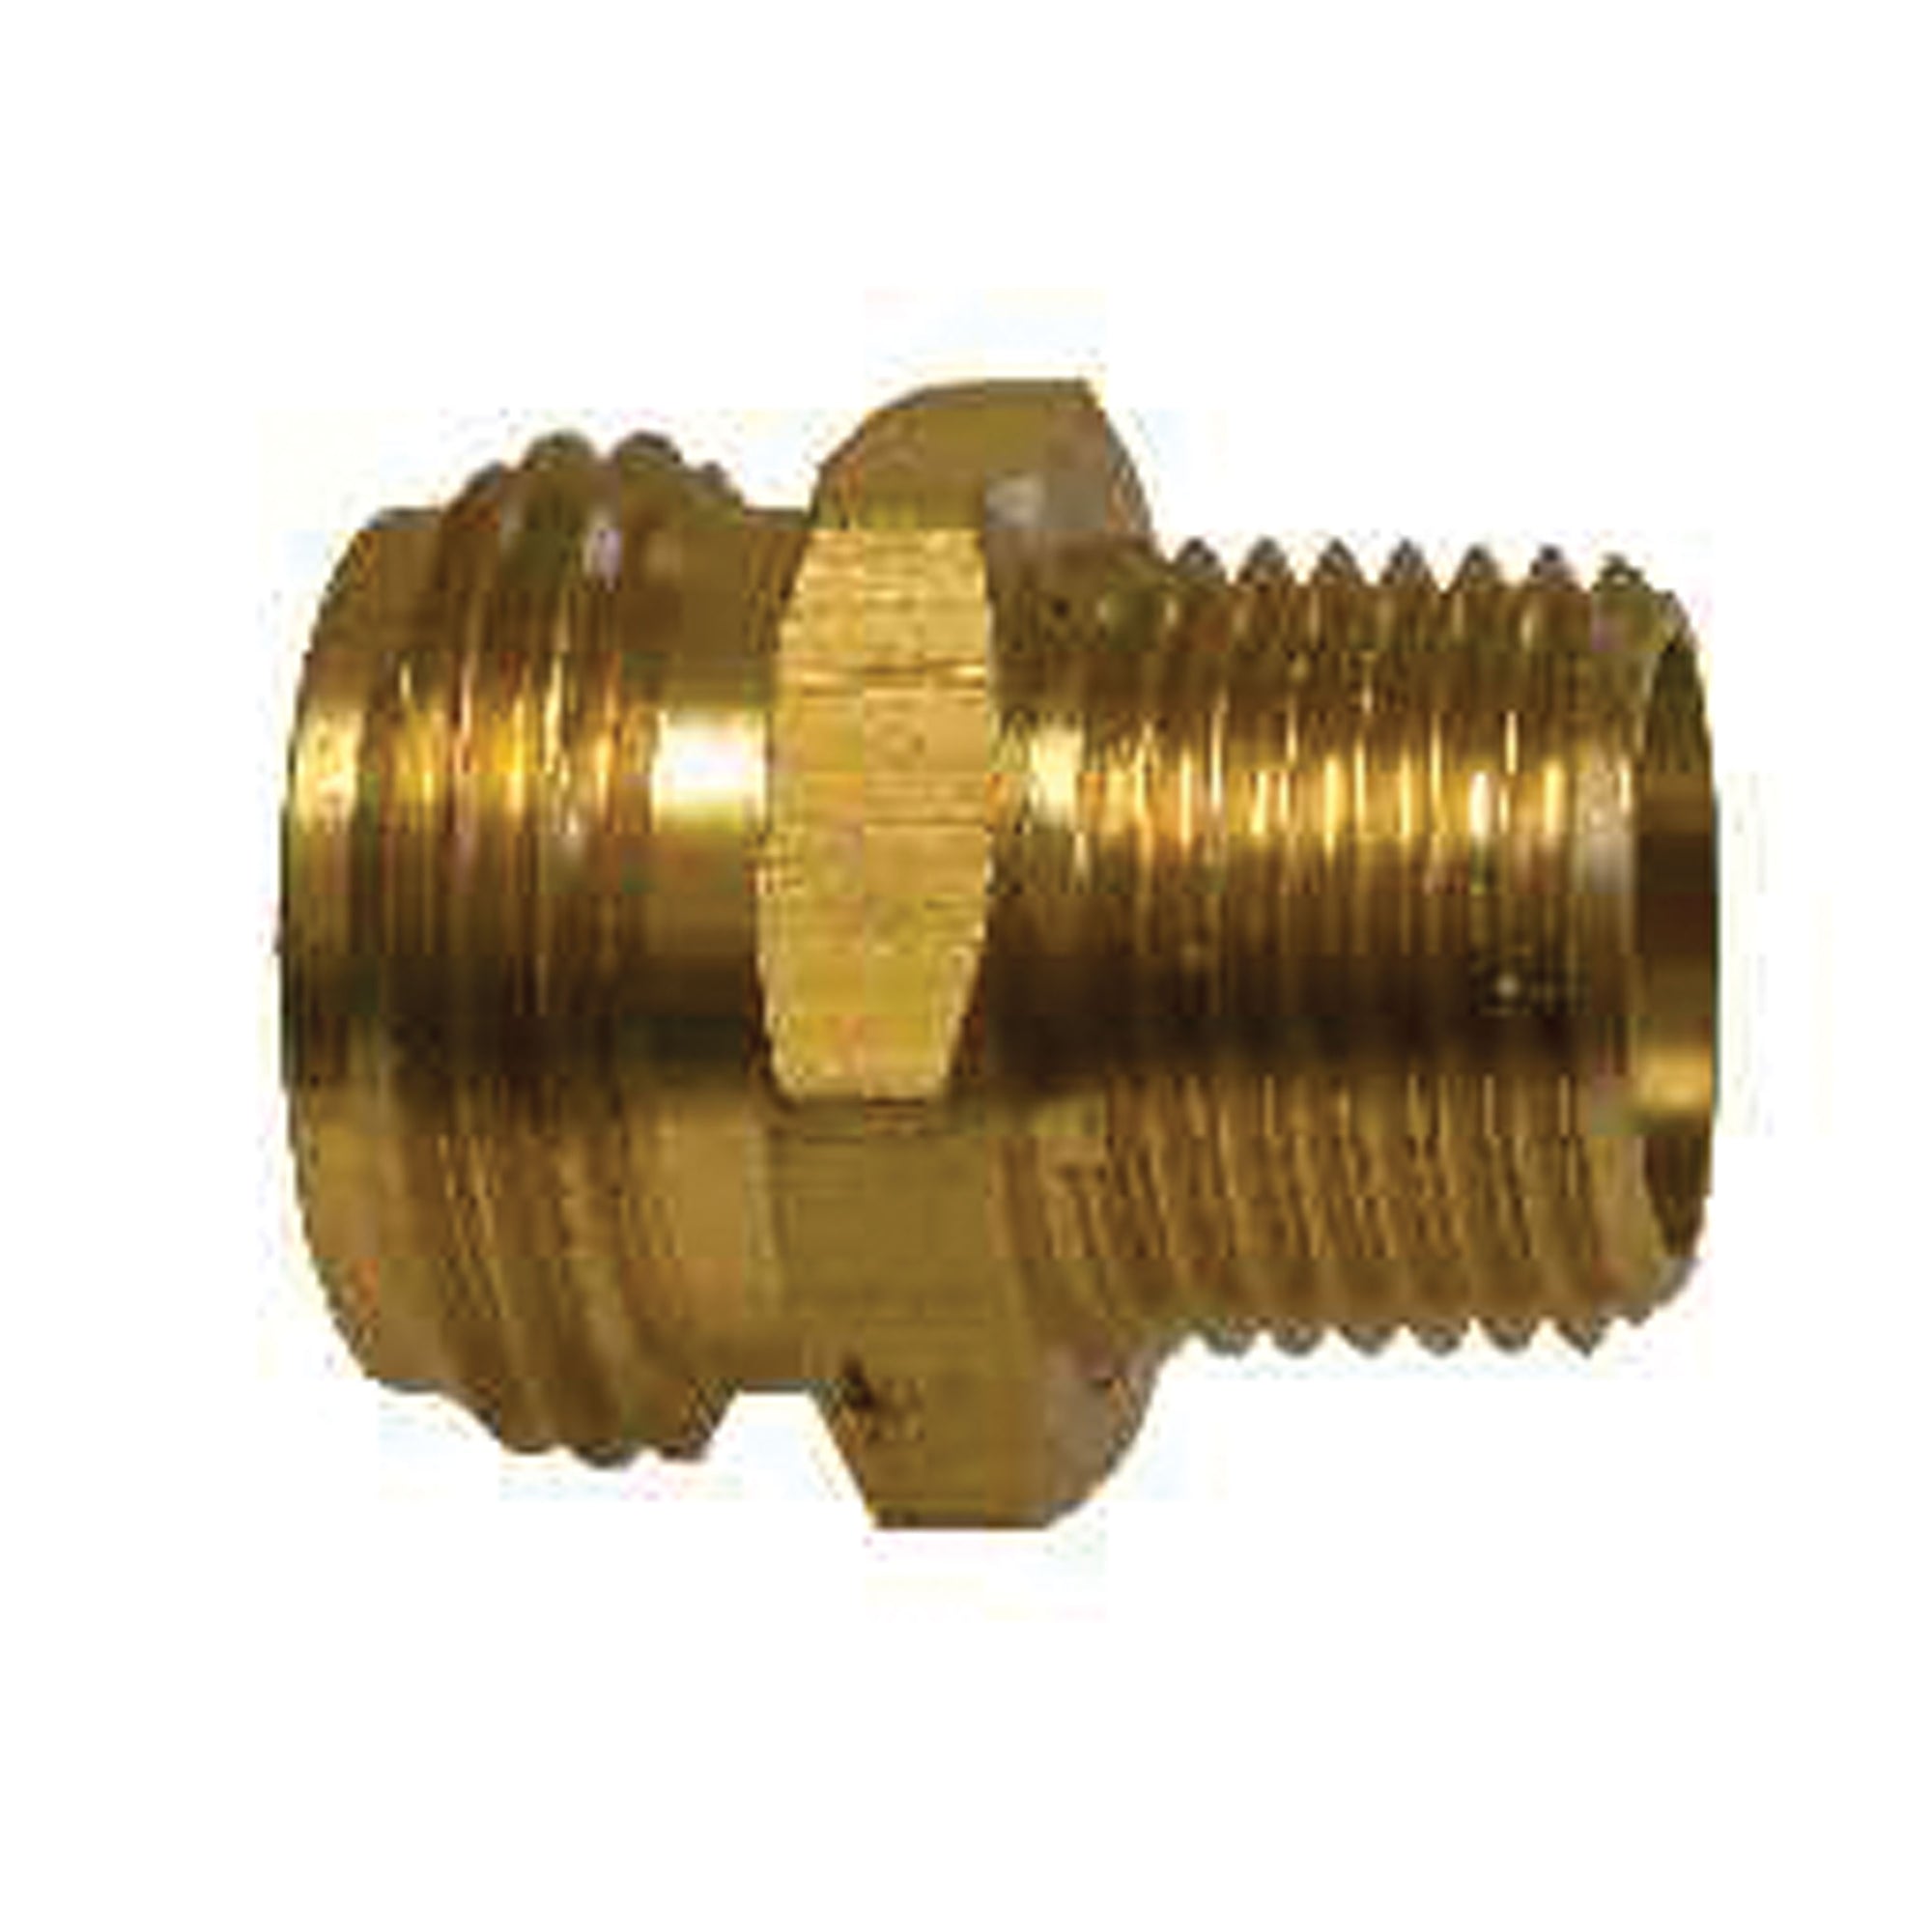 Midland Metal 30-058 Garden Hose Rigid MGH x Male Pipe Adapter No Tap - 3/4 in. x 1/2 in.